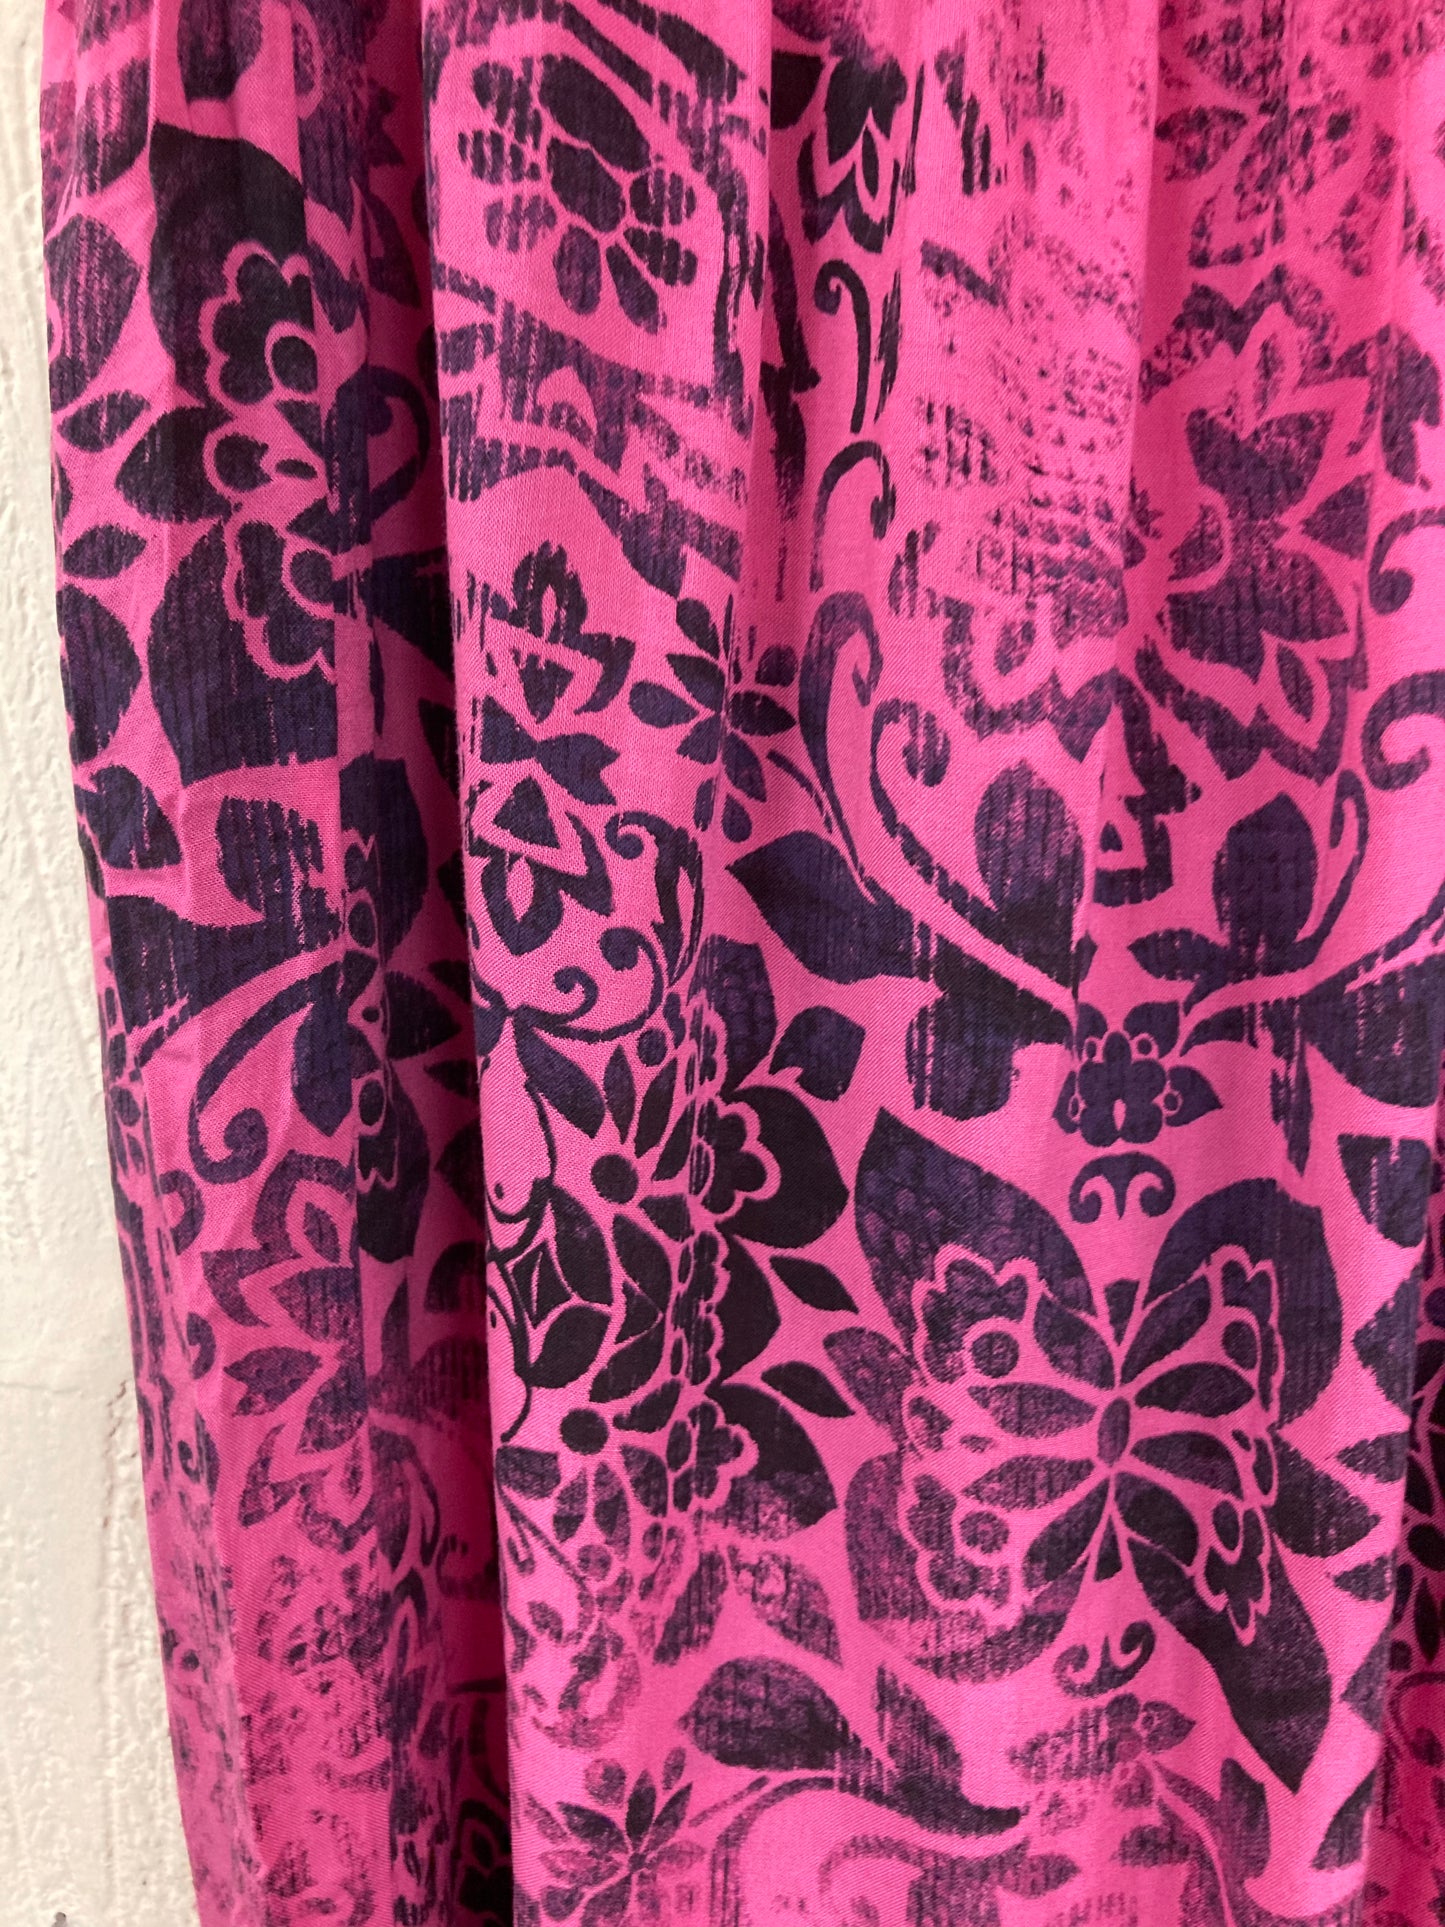 00s Bright Pink with Dappled Floral Pattern Harem Pants Size 8